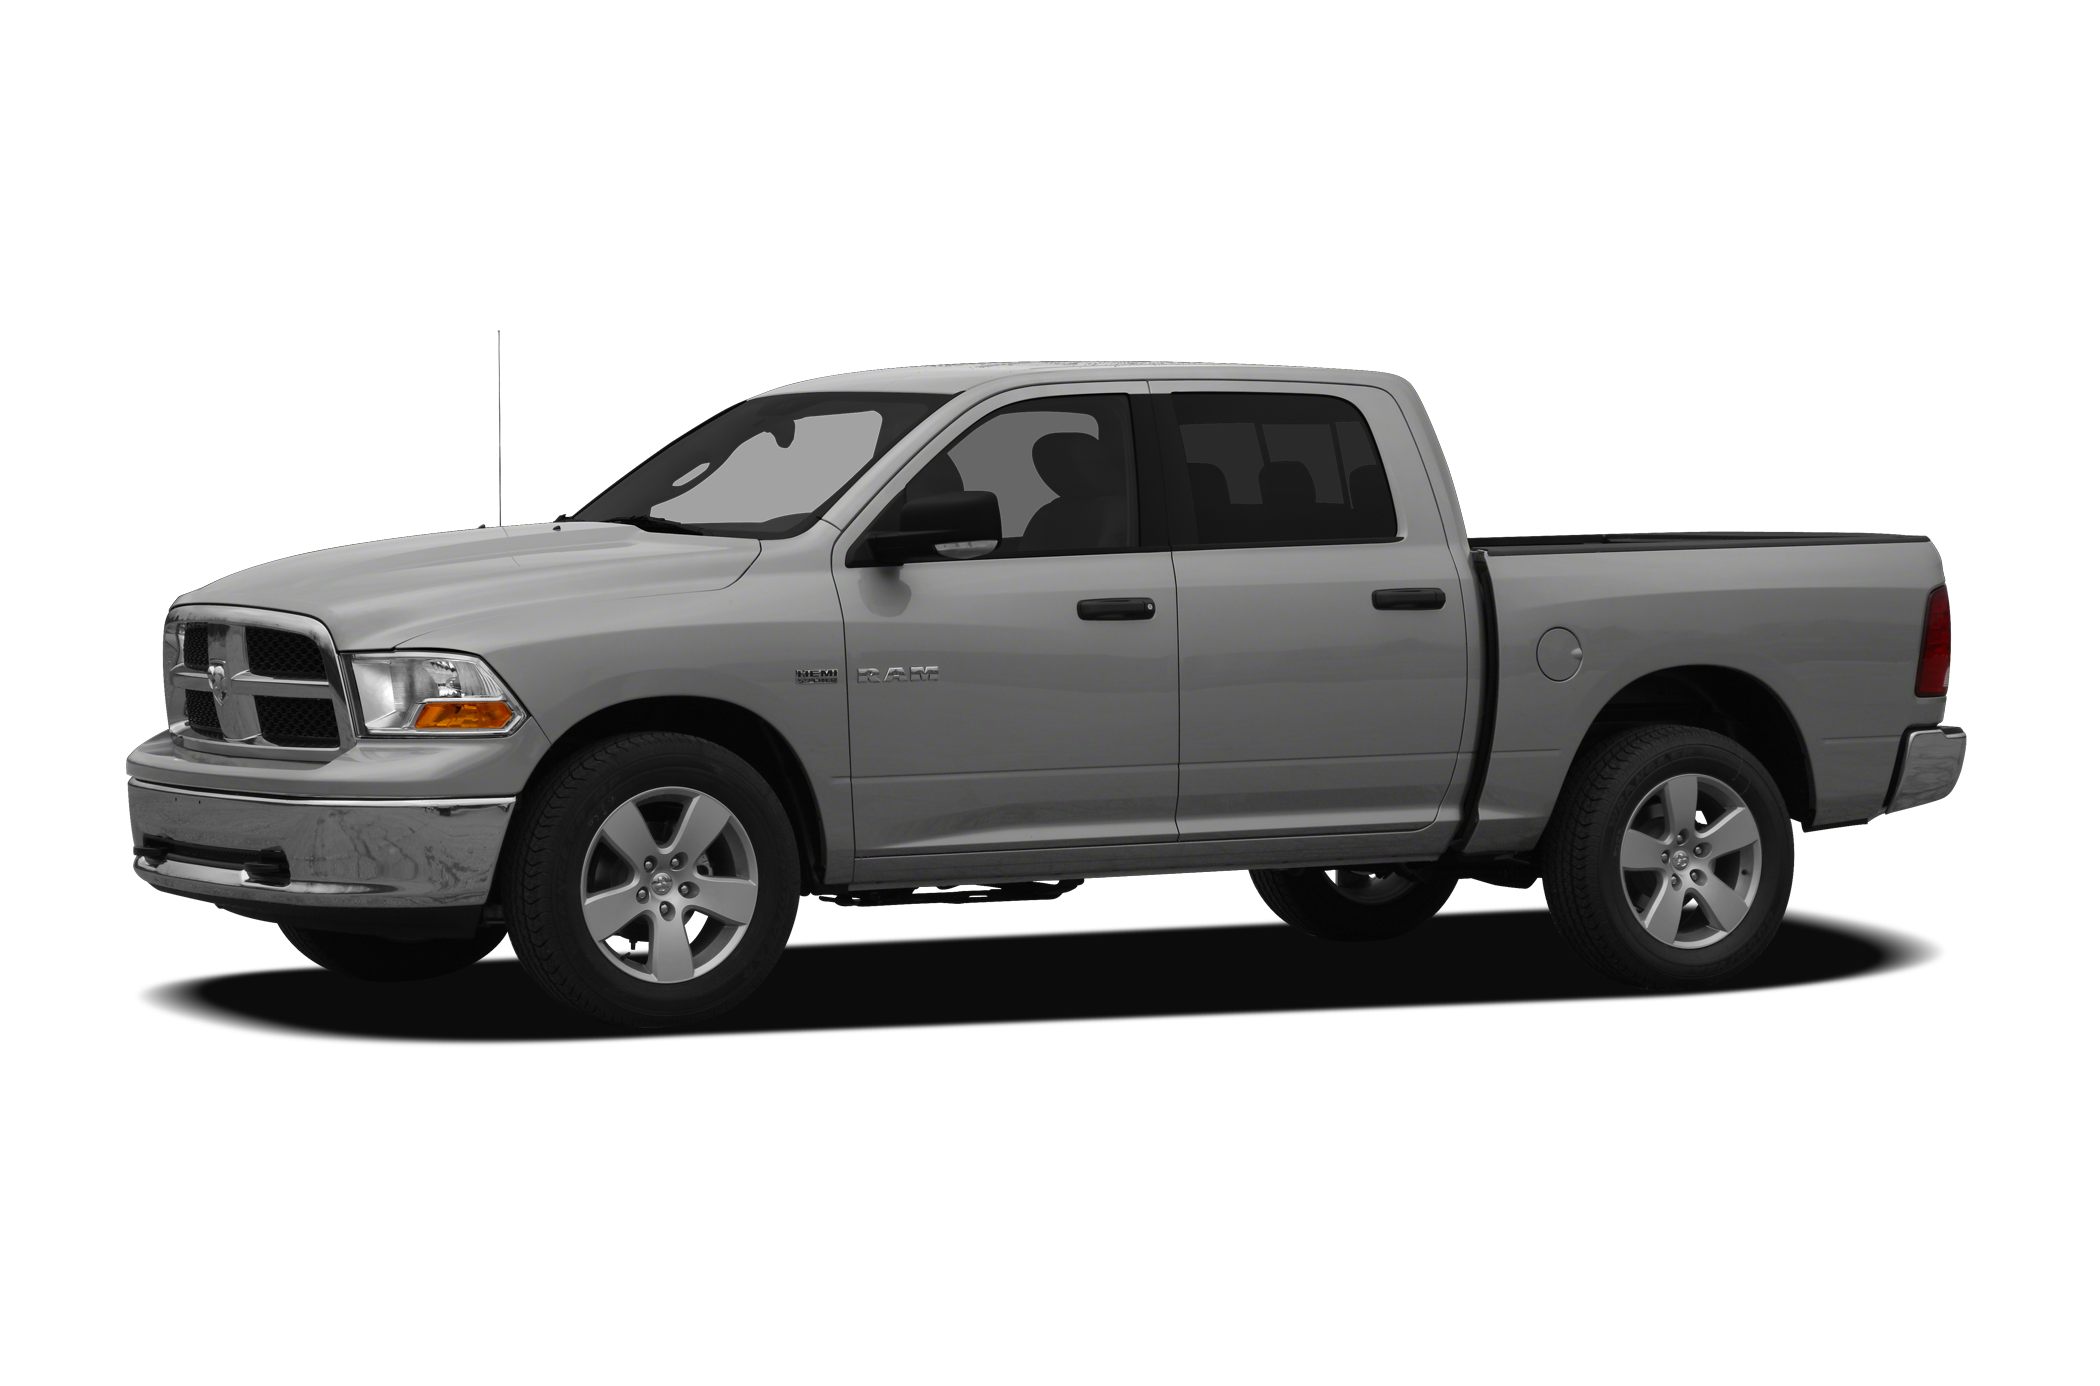 2011 Dodge Ram 1500 Sport 4x2 Crew Cab 140 In Wb Pictures